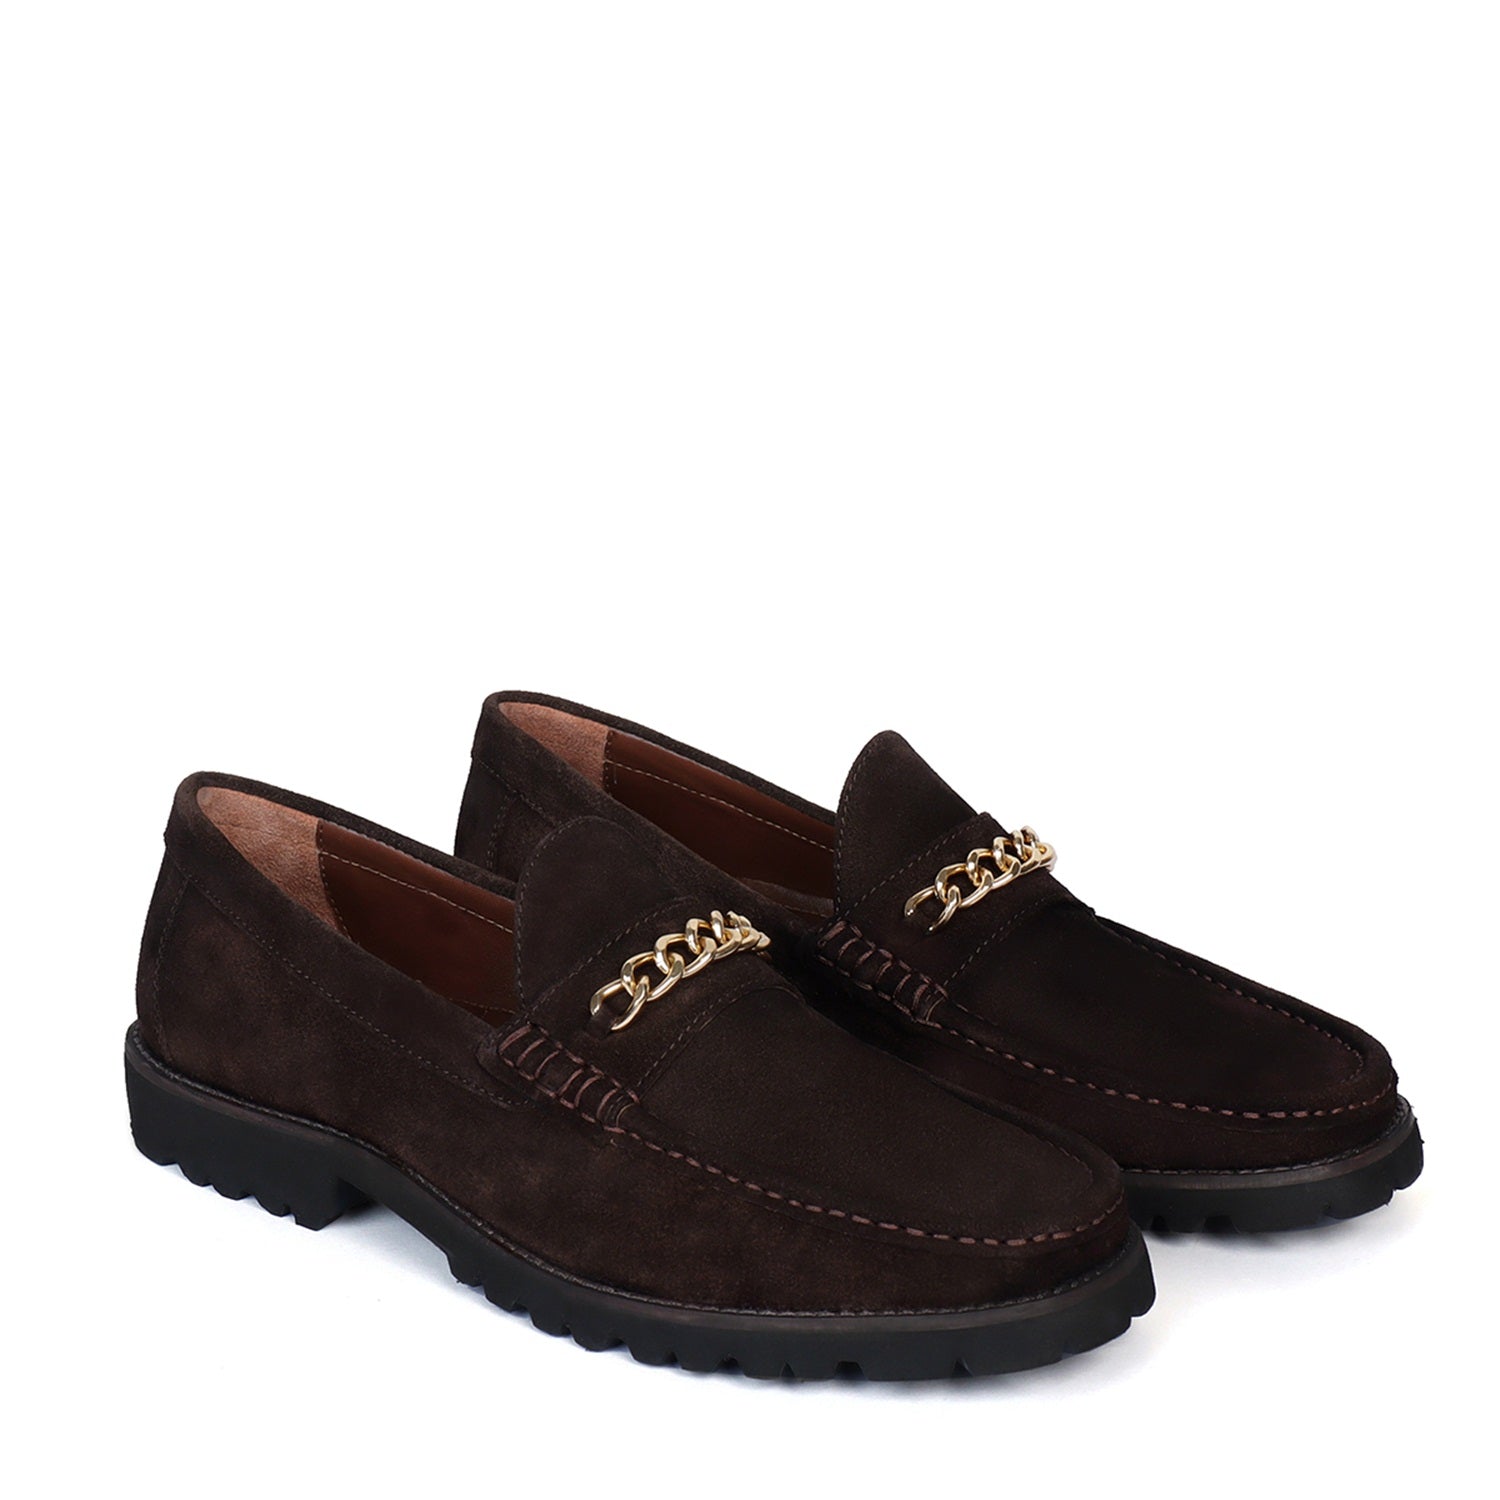 Light Weight Chunky Sole Loafers in Dark Brown Suede Leather with Golden Chain